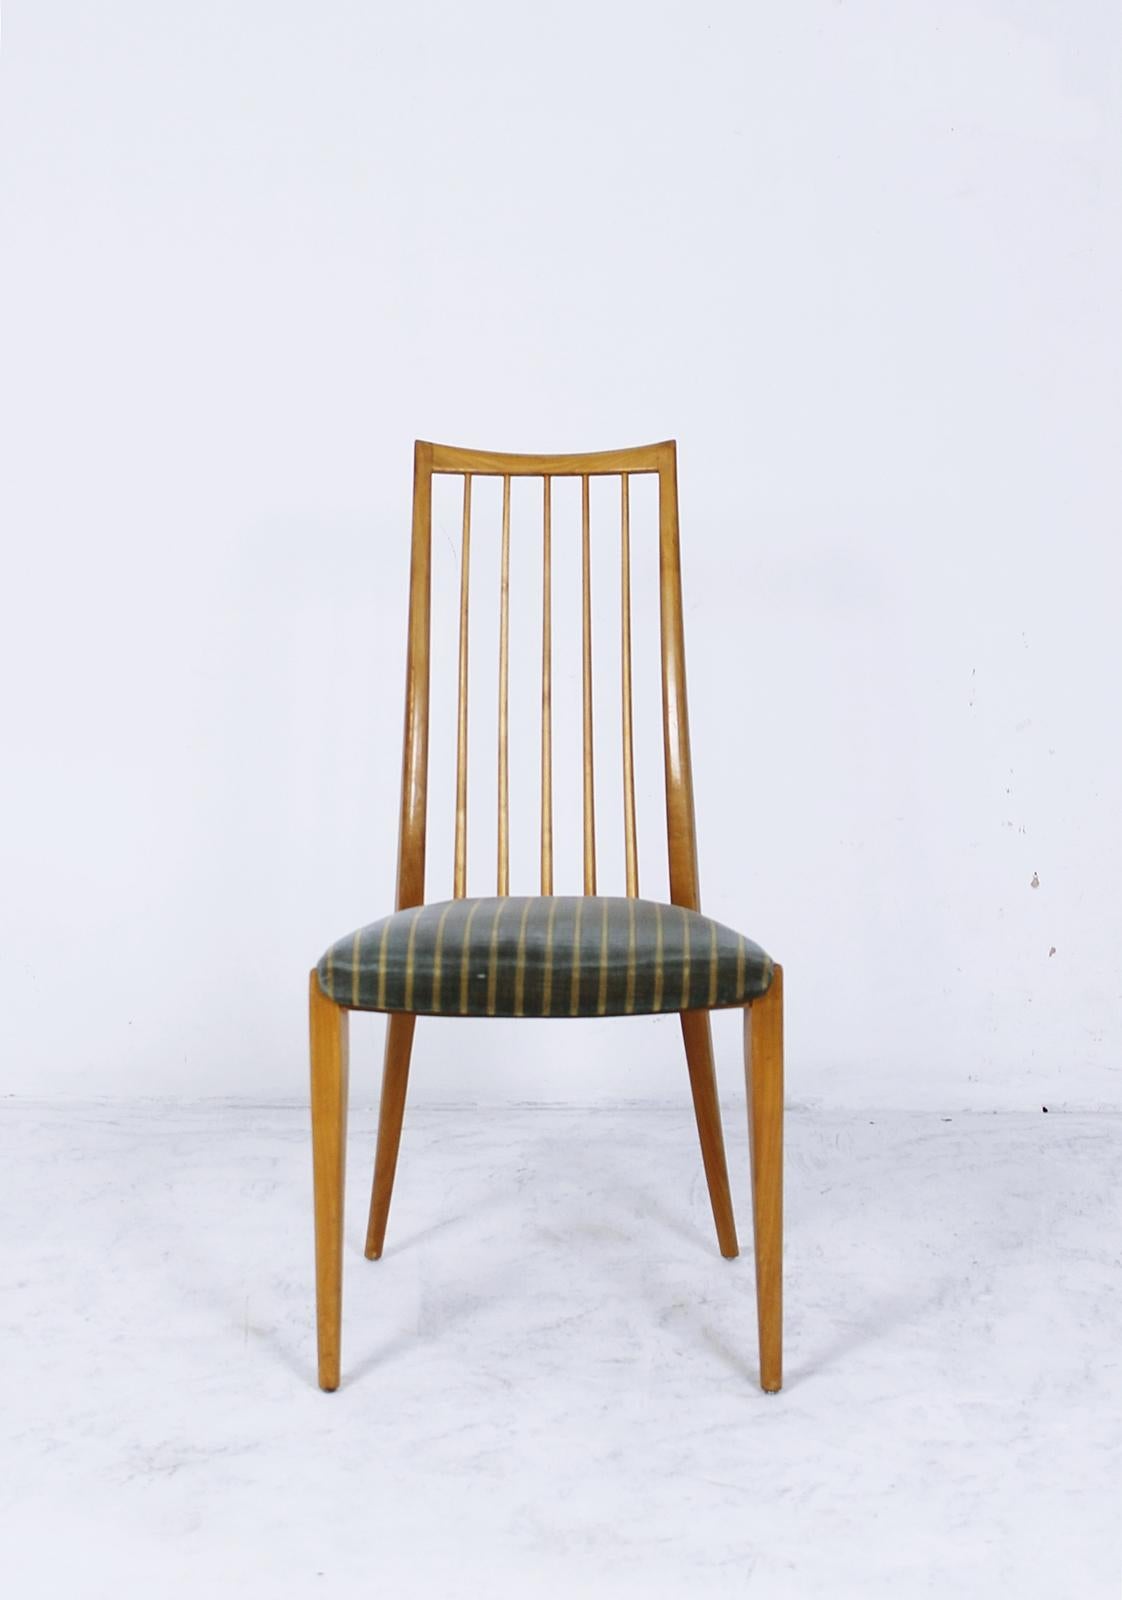 This chair was designed by Ernst Martin Dettinger and produced in Germany in 1960 by Lübke. Made from solid cherry and upholstered in striped velvet.
.
The chairs are in good used condition. They have minor scratches on the legs. All chairs are